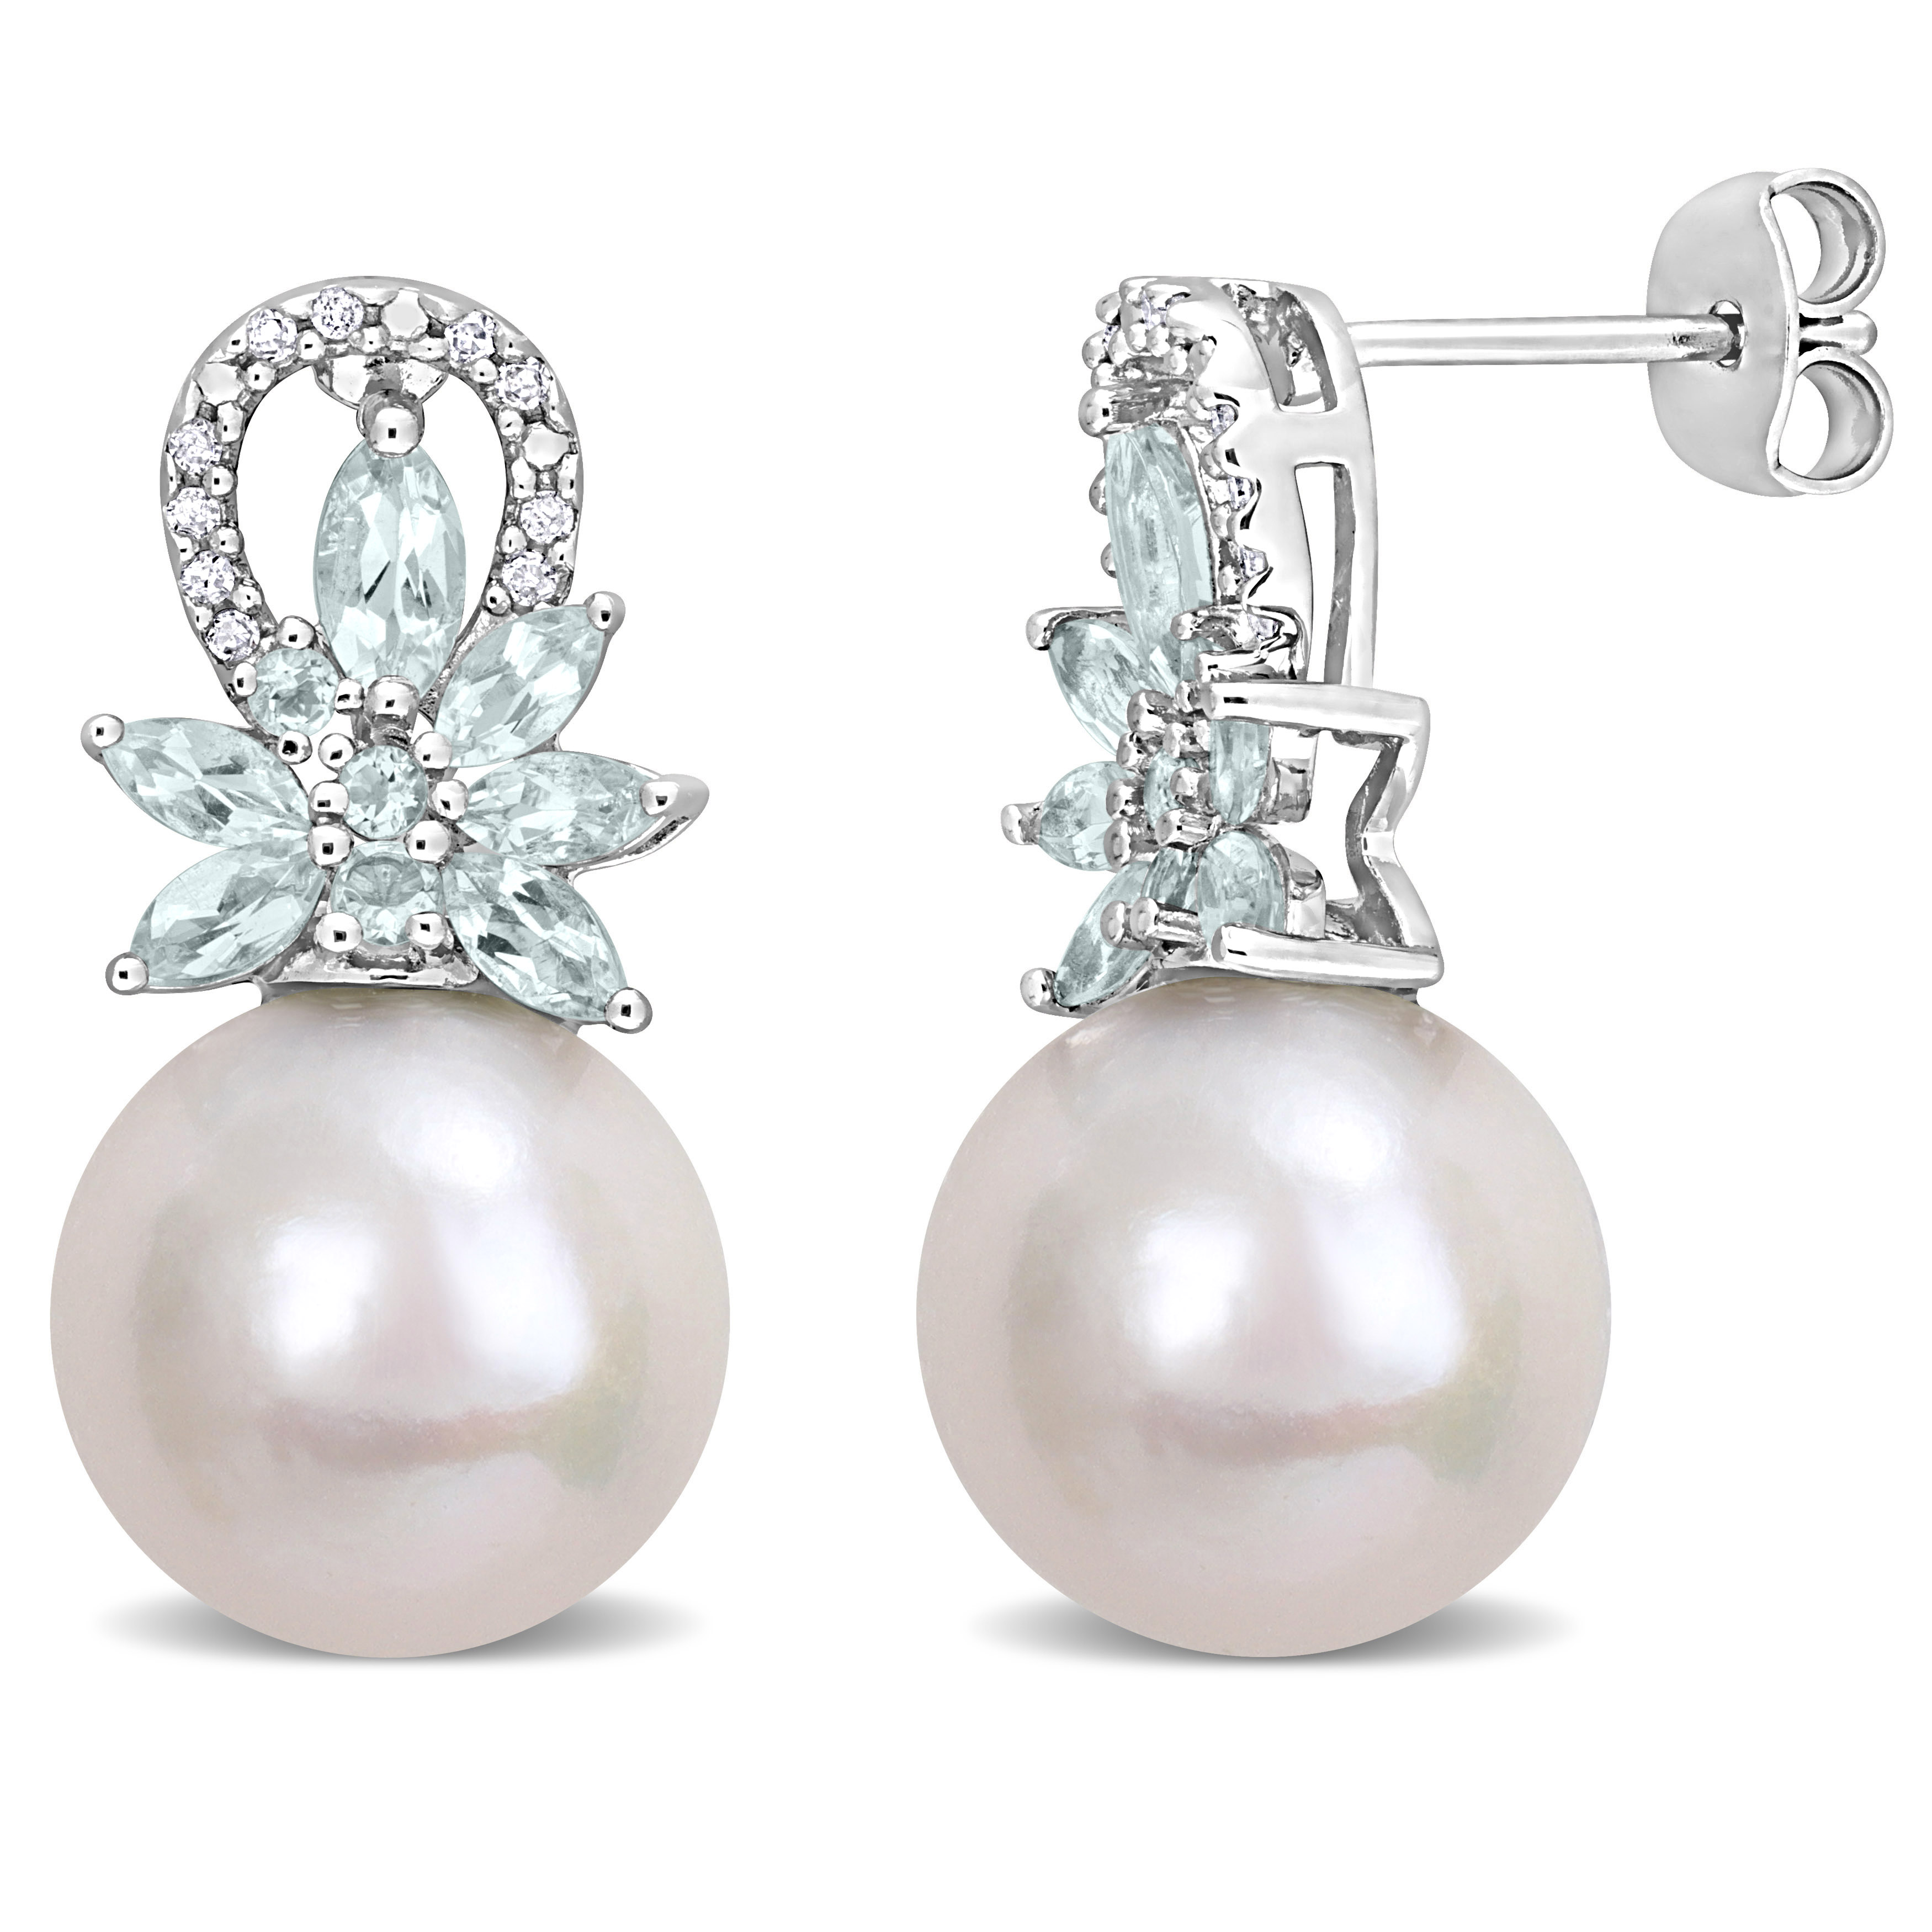 11-12 MM Cultured Freshwater Pearl and 1 1/5 CT TGW Aquamarine and 1/10 CT TW Diamond Flower Drop Earrings in Sterling Silver